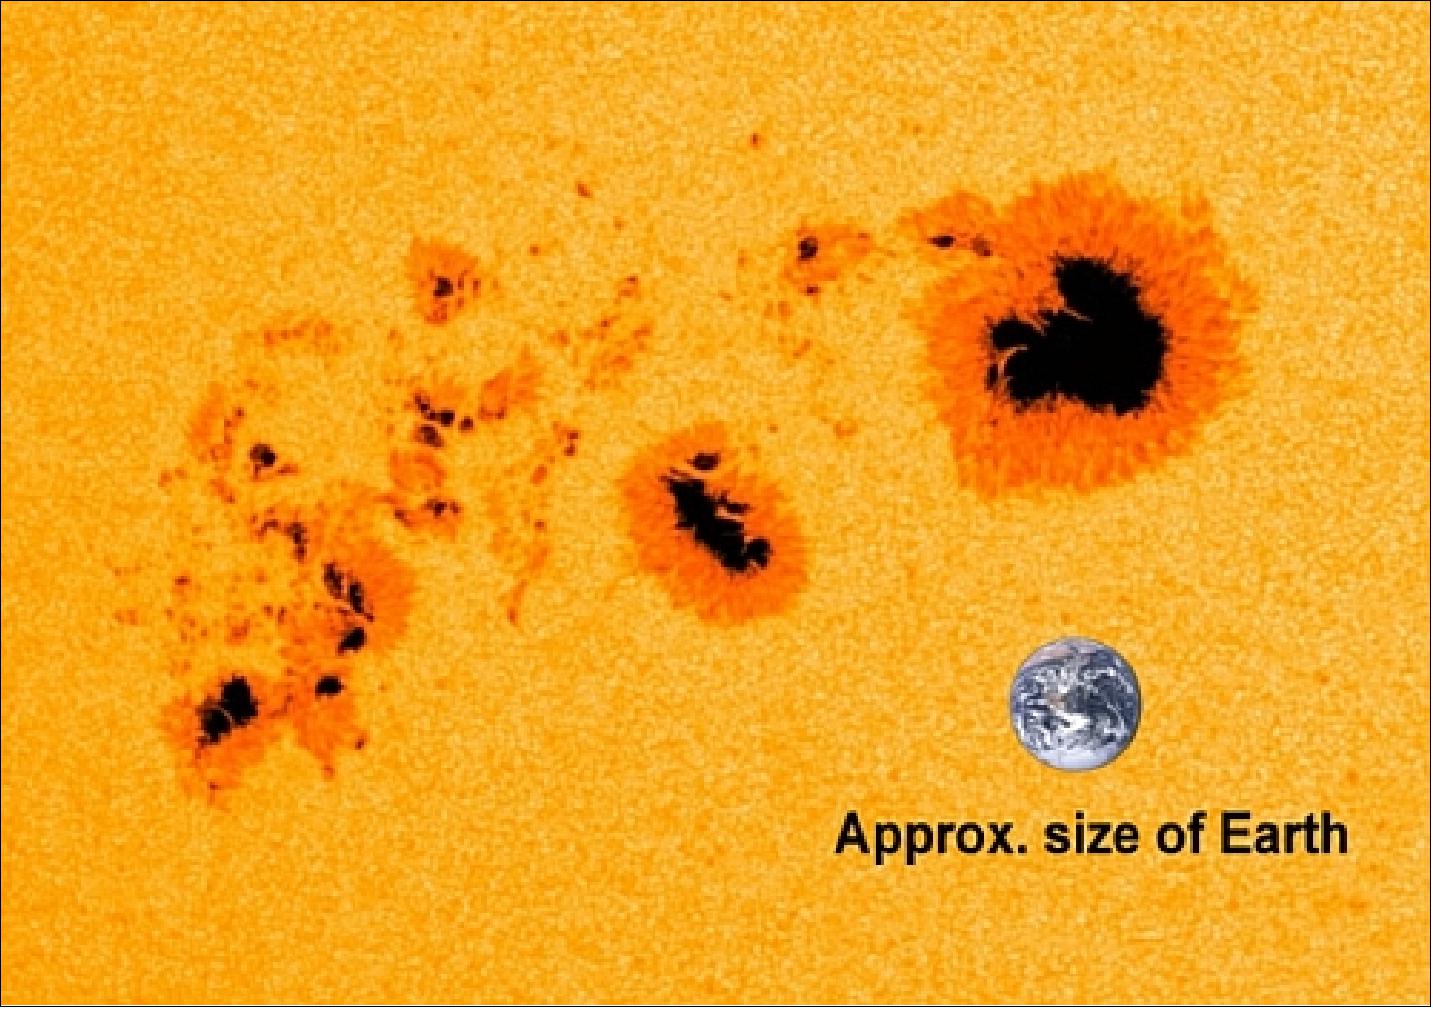 Figure 28: One of the largest sunspots in the last nine years, labeled AR1944, was seen in early January 2014, as captured by NASA's SDO. An image of Earth has been added for scale (image credit: NASA)